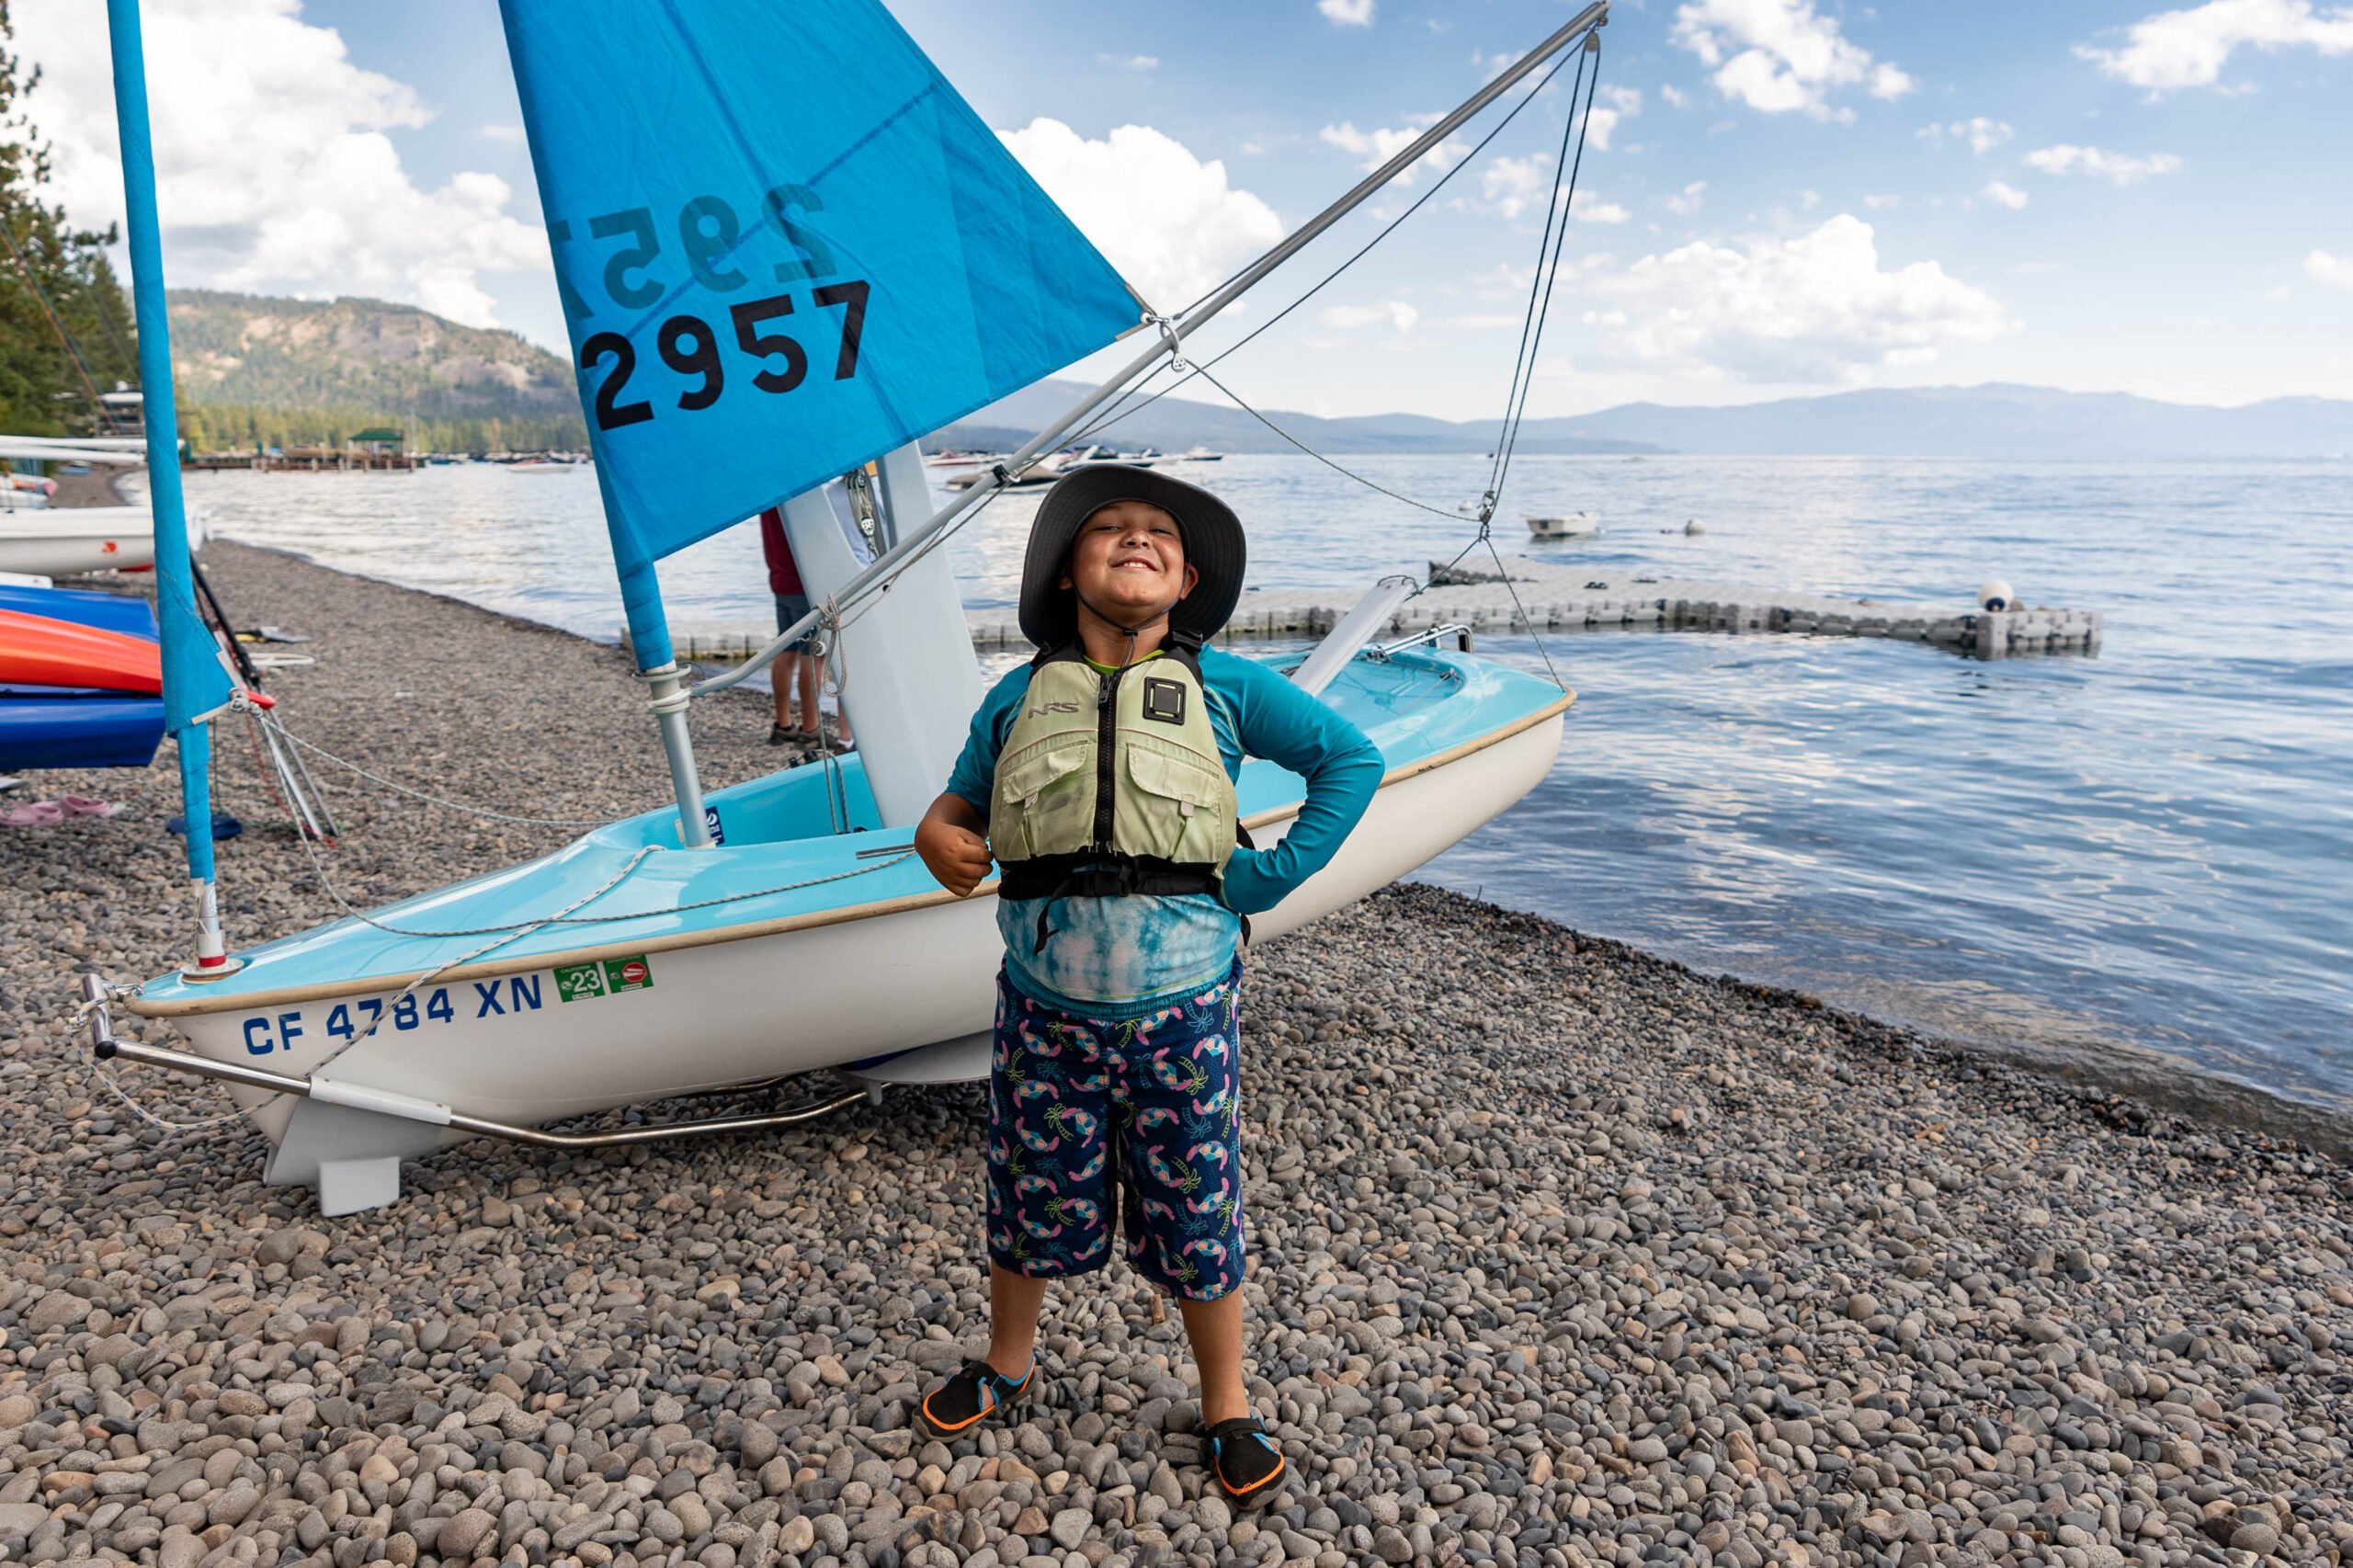 Milan's Story: Expanding Access for Tahoe Locals